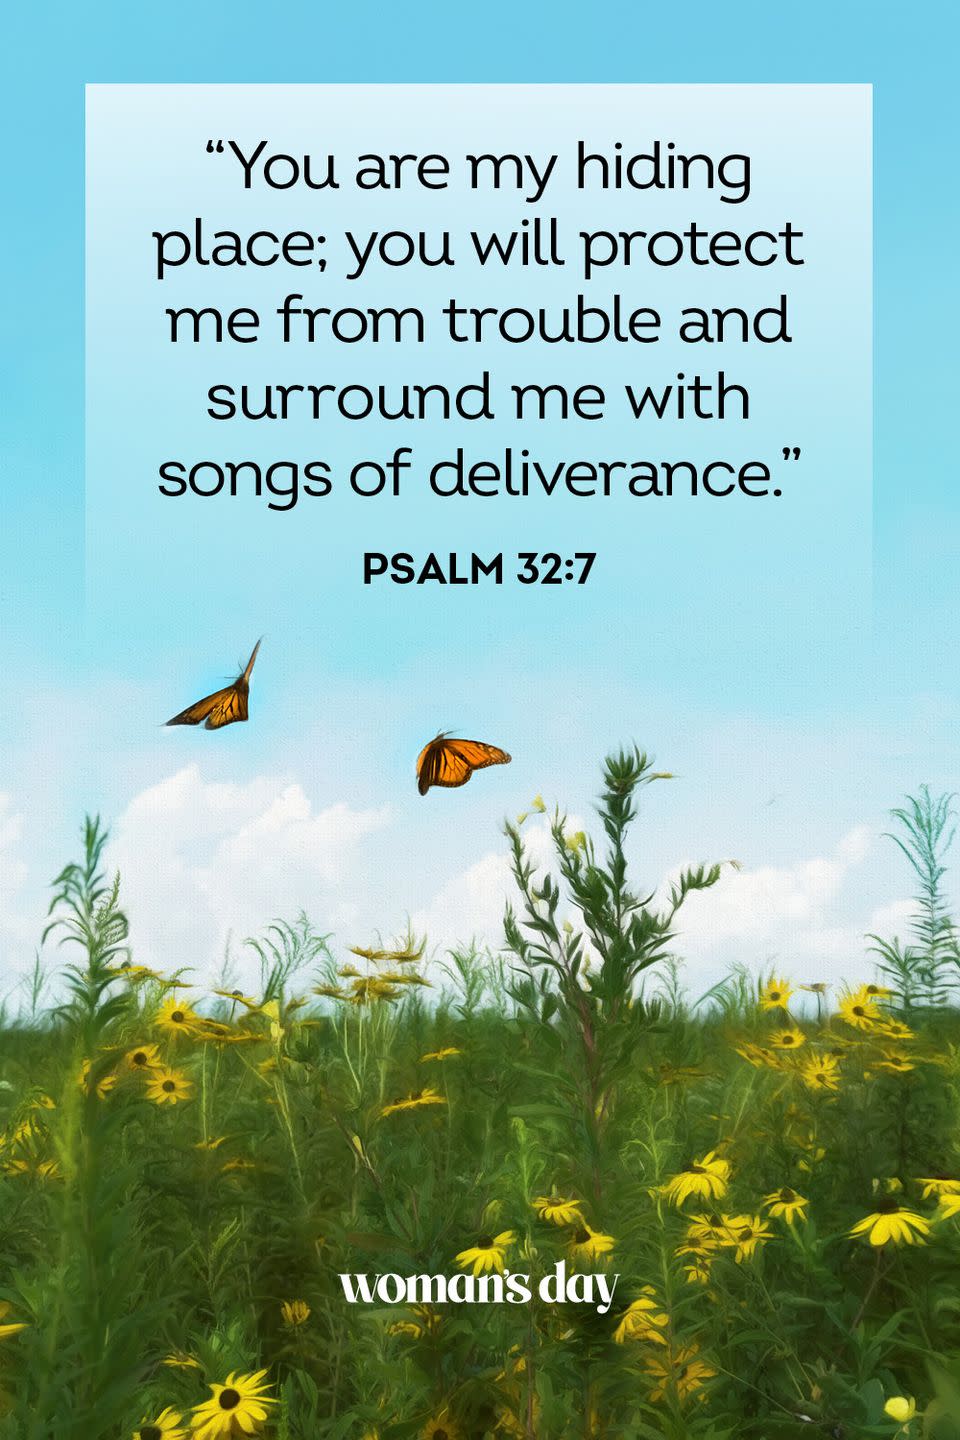 <p>"You are my hiding place; you will protect me from trouble and surround me with songs of deliverance." — Psalm 32:7</p><p><strong>The Good News:</strong> In times when you feel like you need to escape those around you for a while, look to God as a place of shelter and warmth.</p>